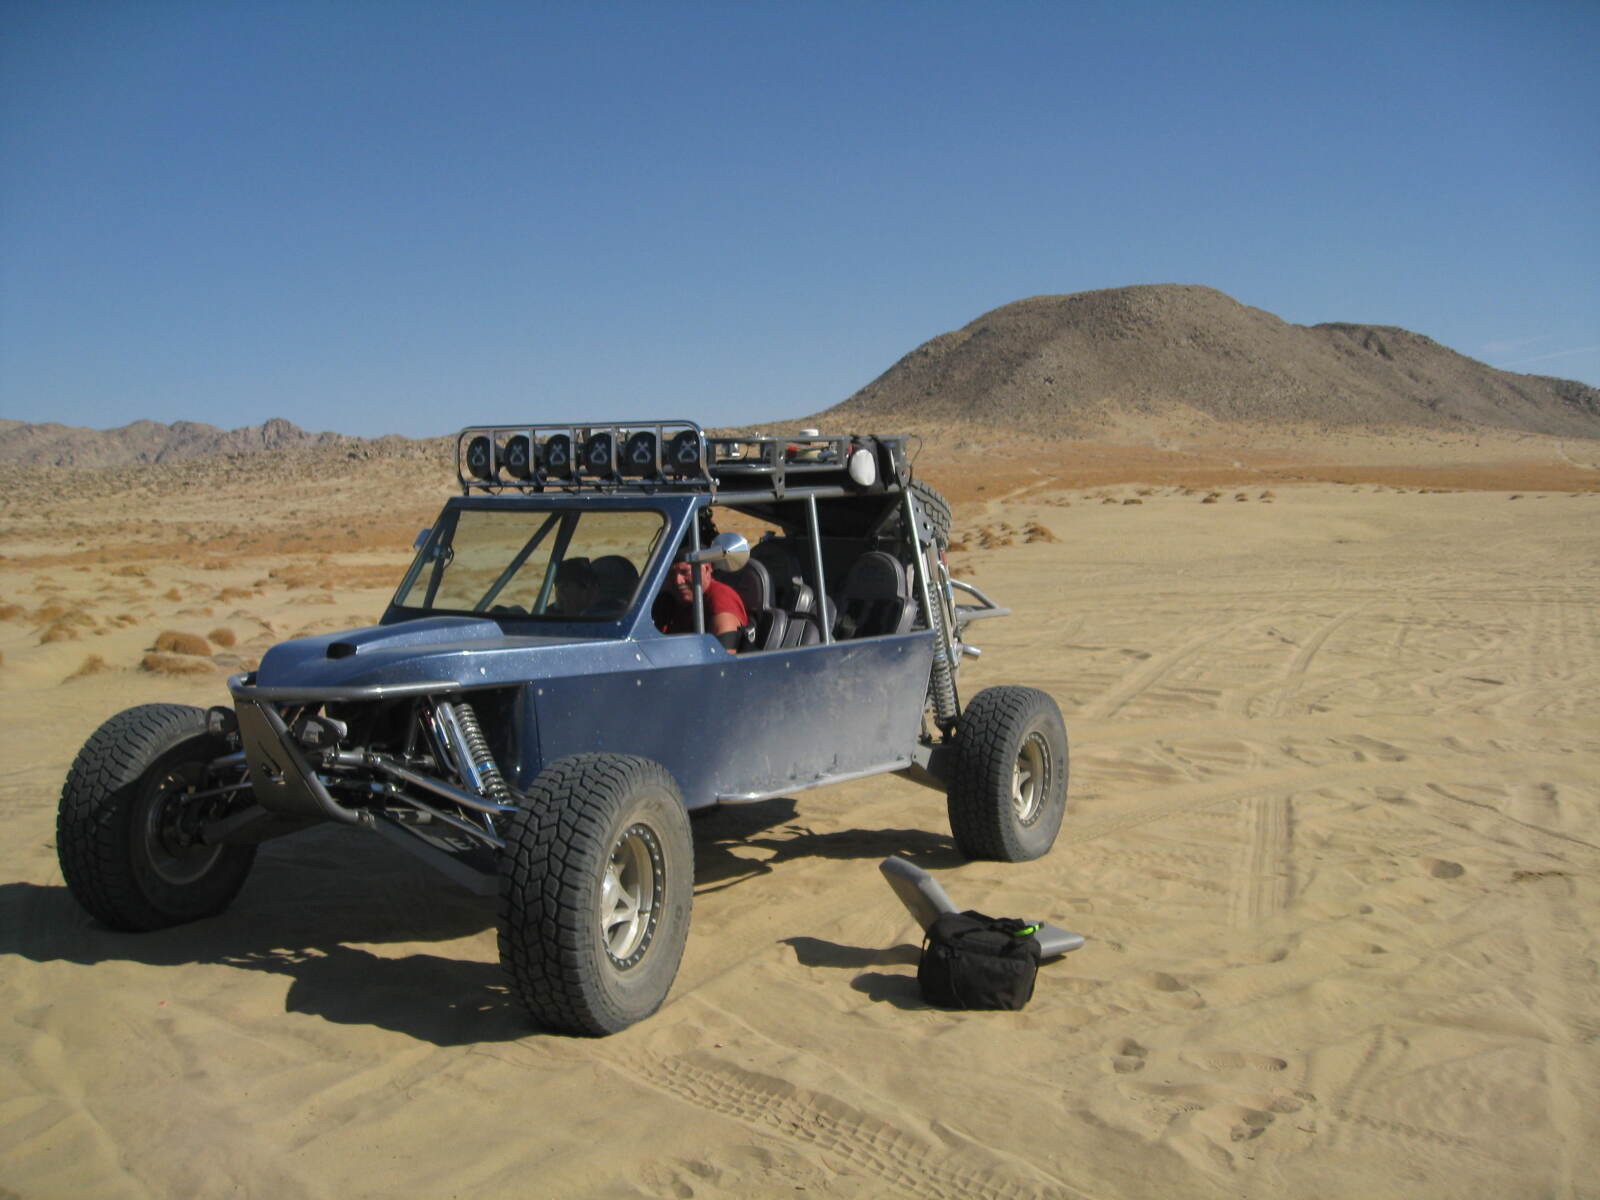 For Sale: 2007 Trick Racing 5 Seat Prerunner  - photo2